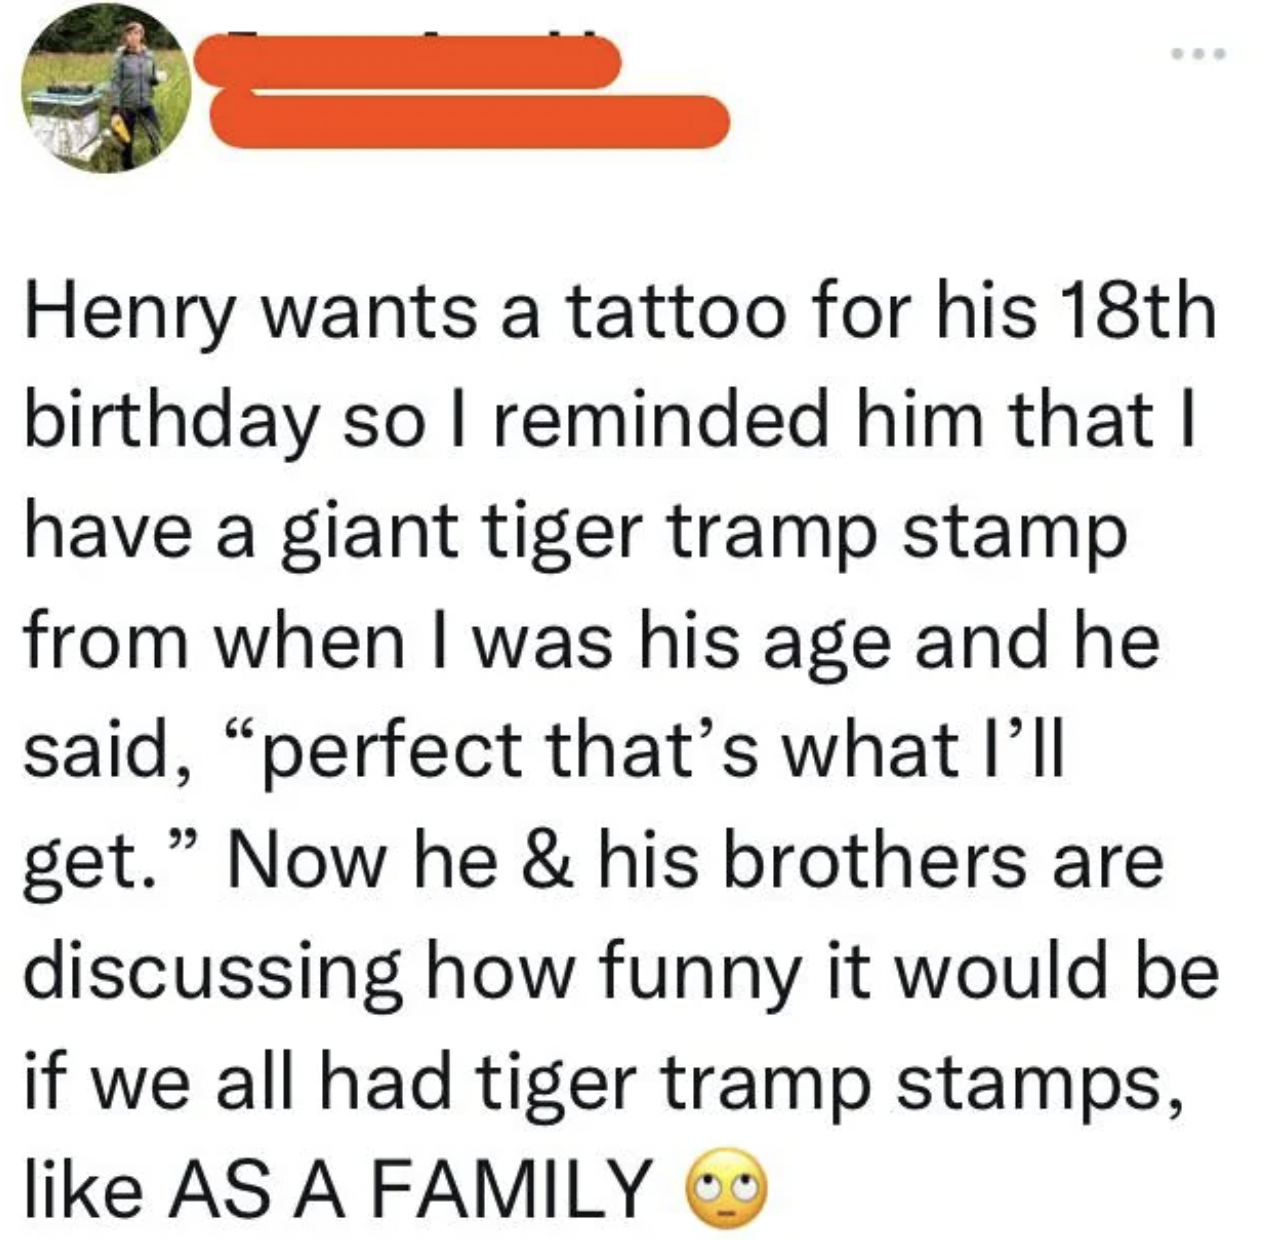 Cringe Pics - kitchen thot if women want rights - Henry wants a tattoo for his 18th birthday so I reminded him that I have a giant tiger tramp stamp from when I was his age and he said,